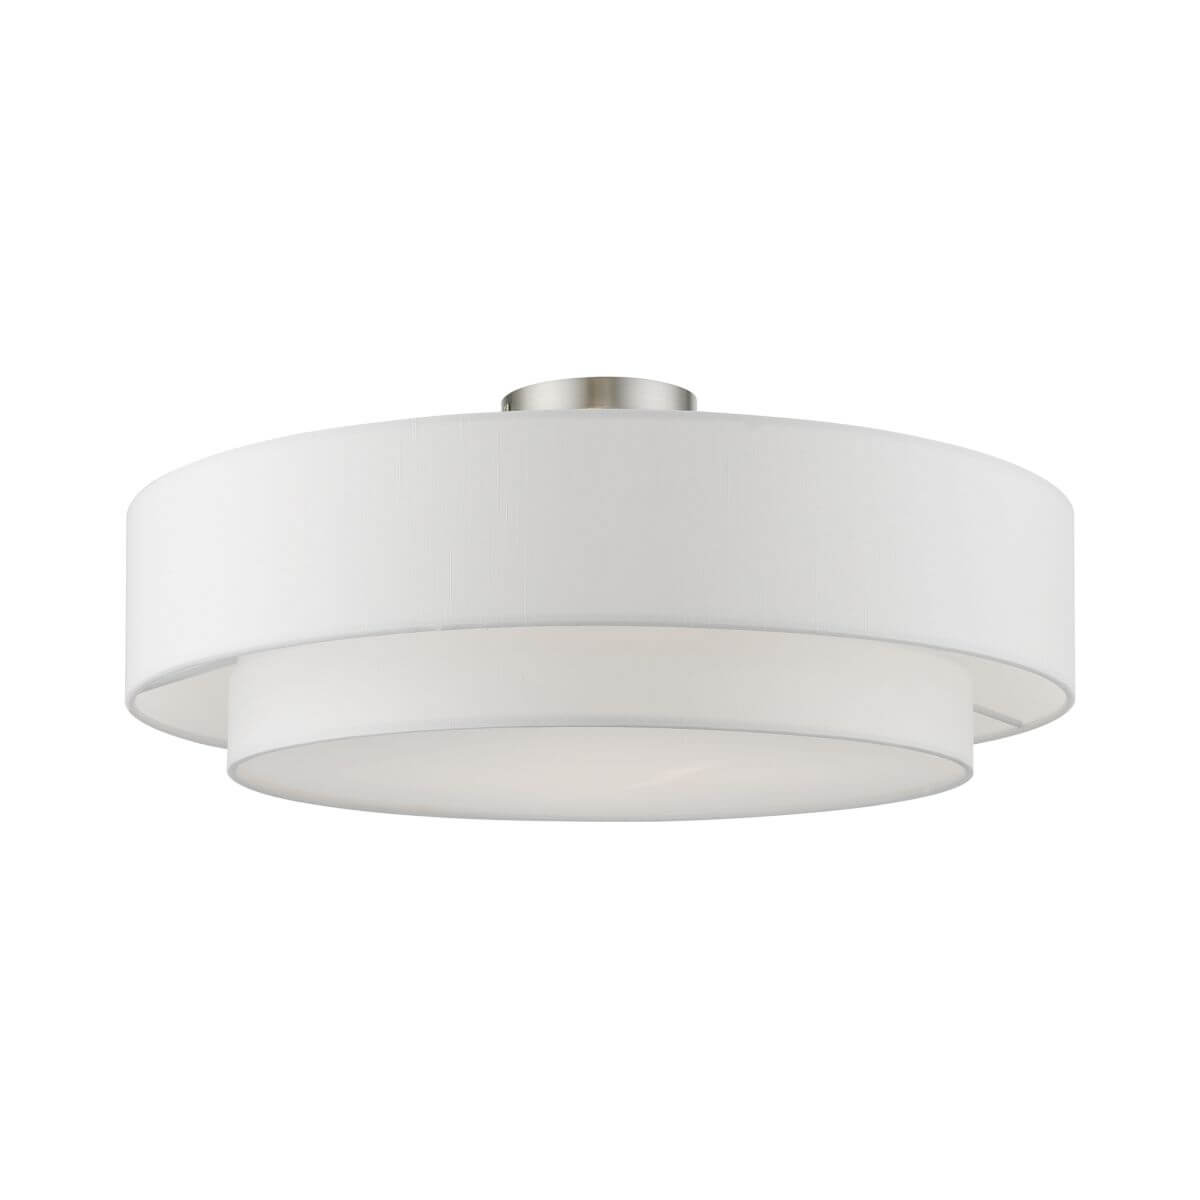 4 Light 22 inch Semi-Flush Mount in Brushed Nickel with Hand Crafted Off-white Hardback Fabric Shade - White Fabric Inside - 245320